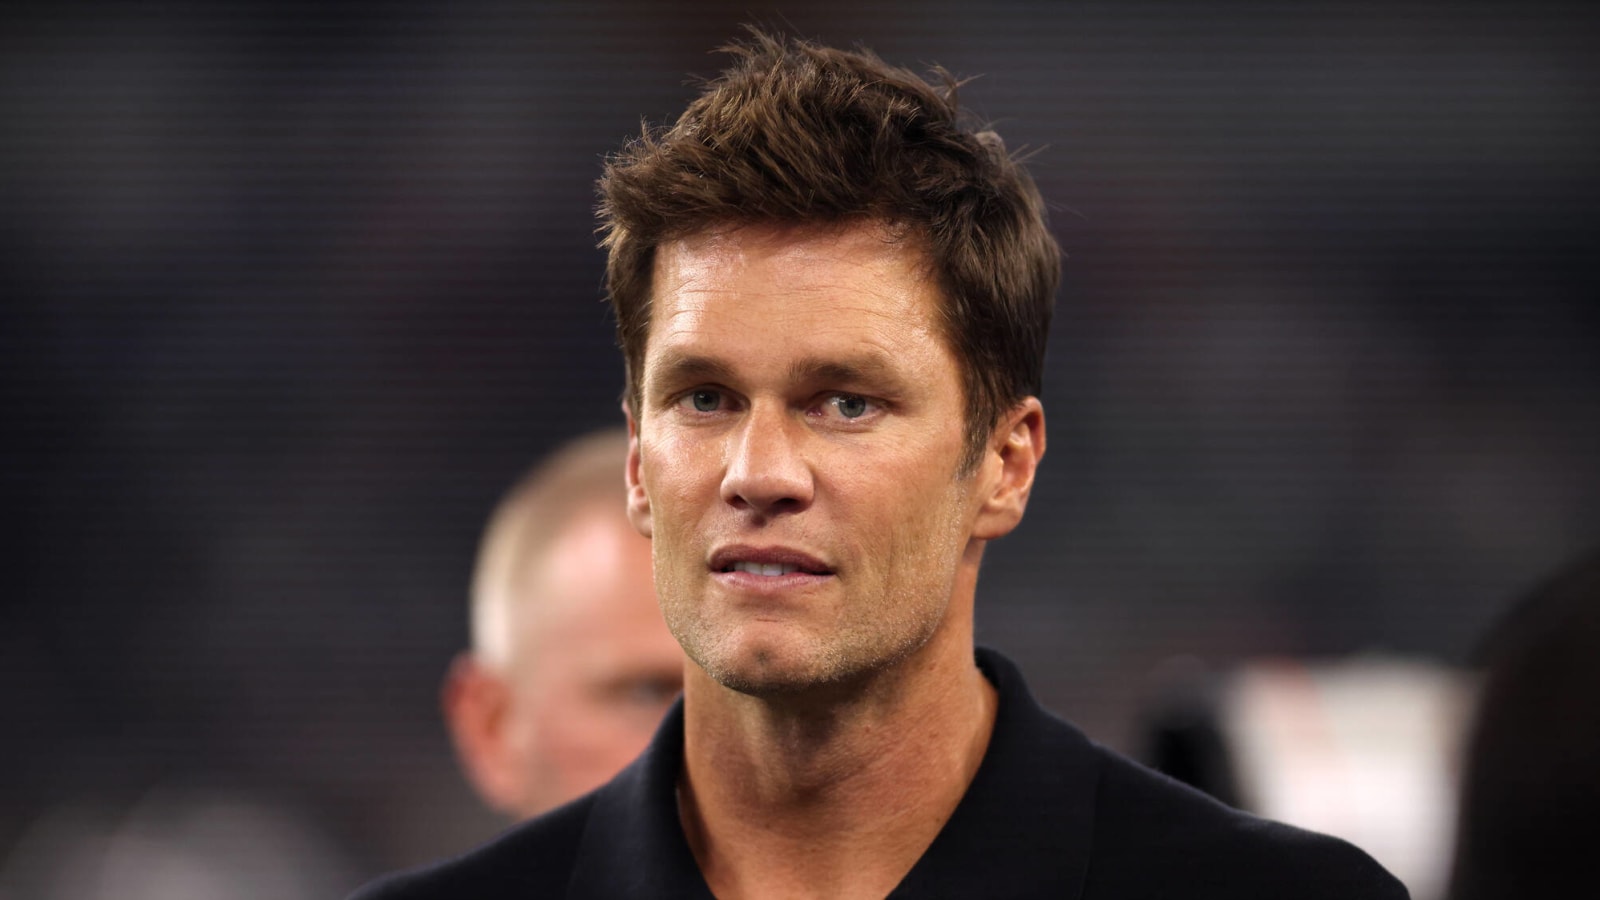 Owners concerned about potential conflict of interest for Tom Brady